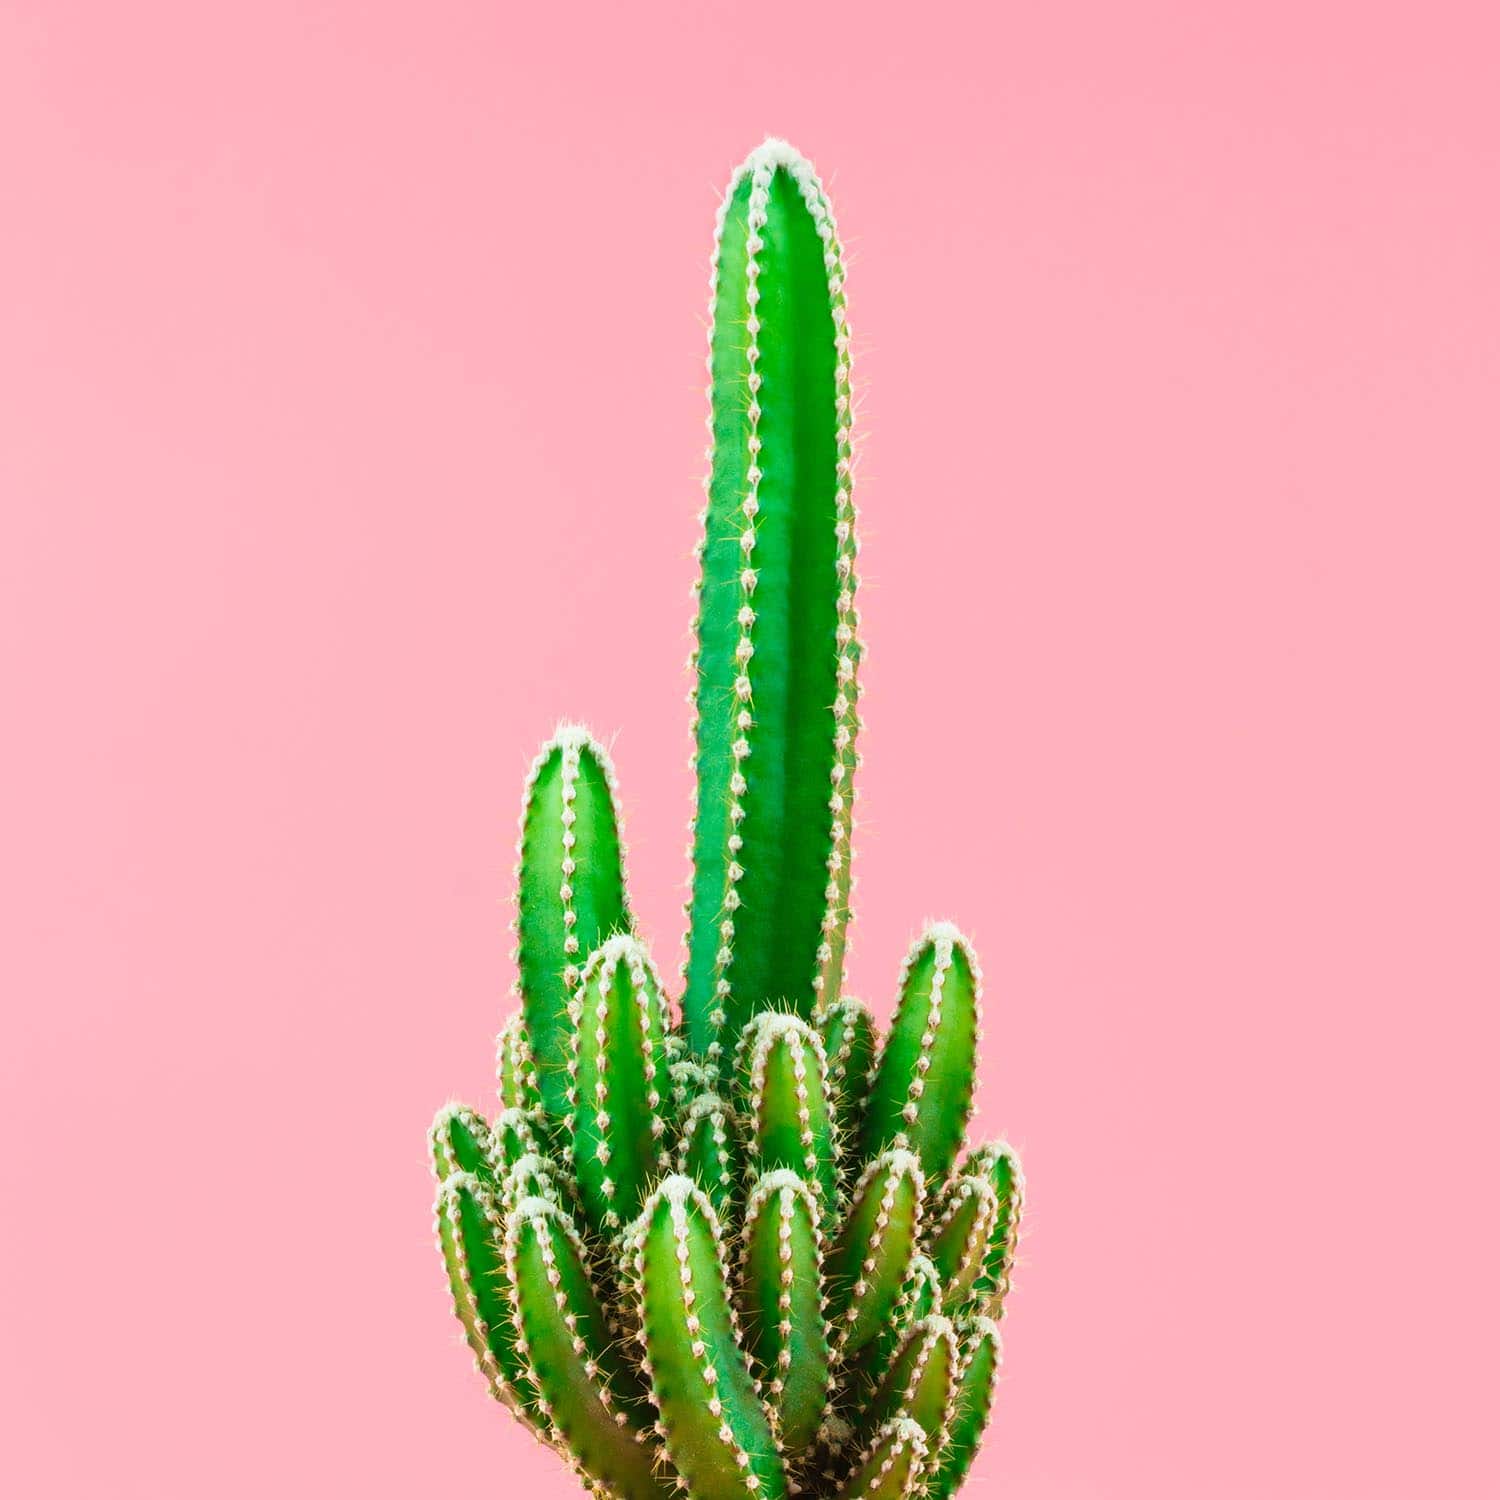 Cactus on pink background